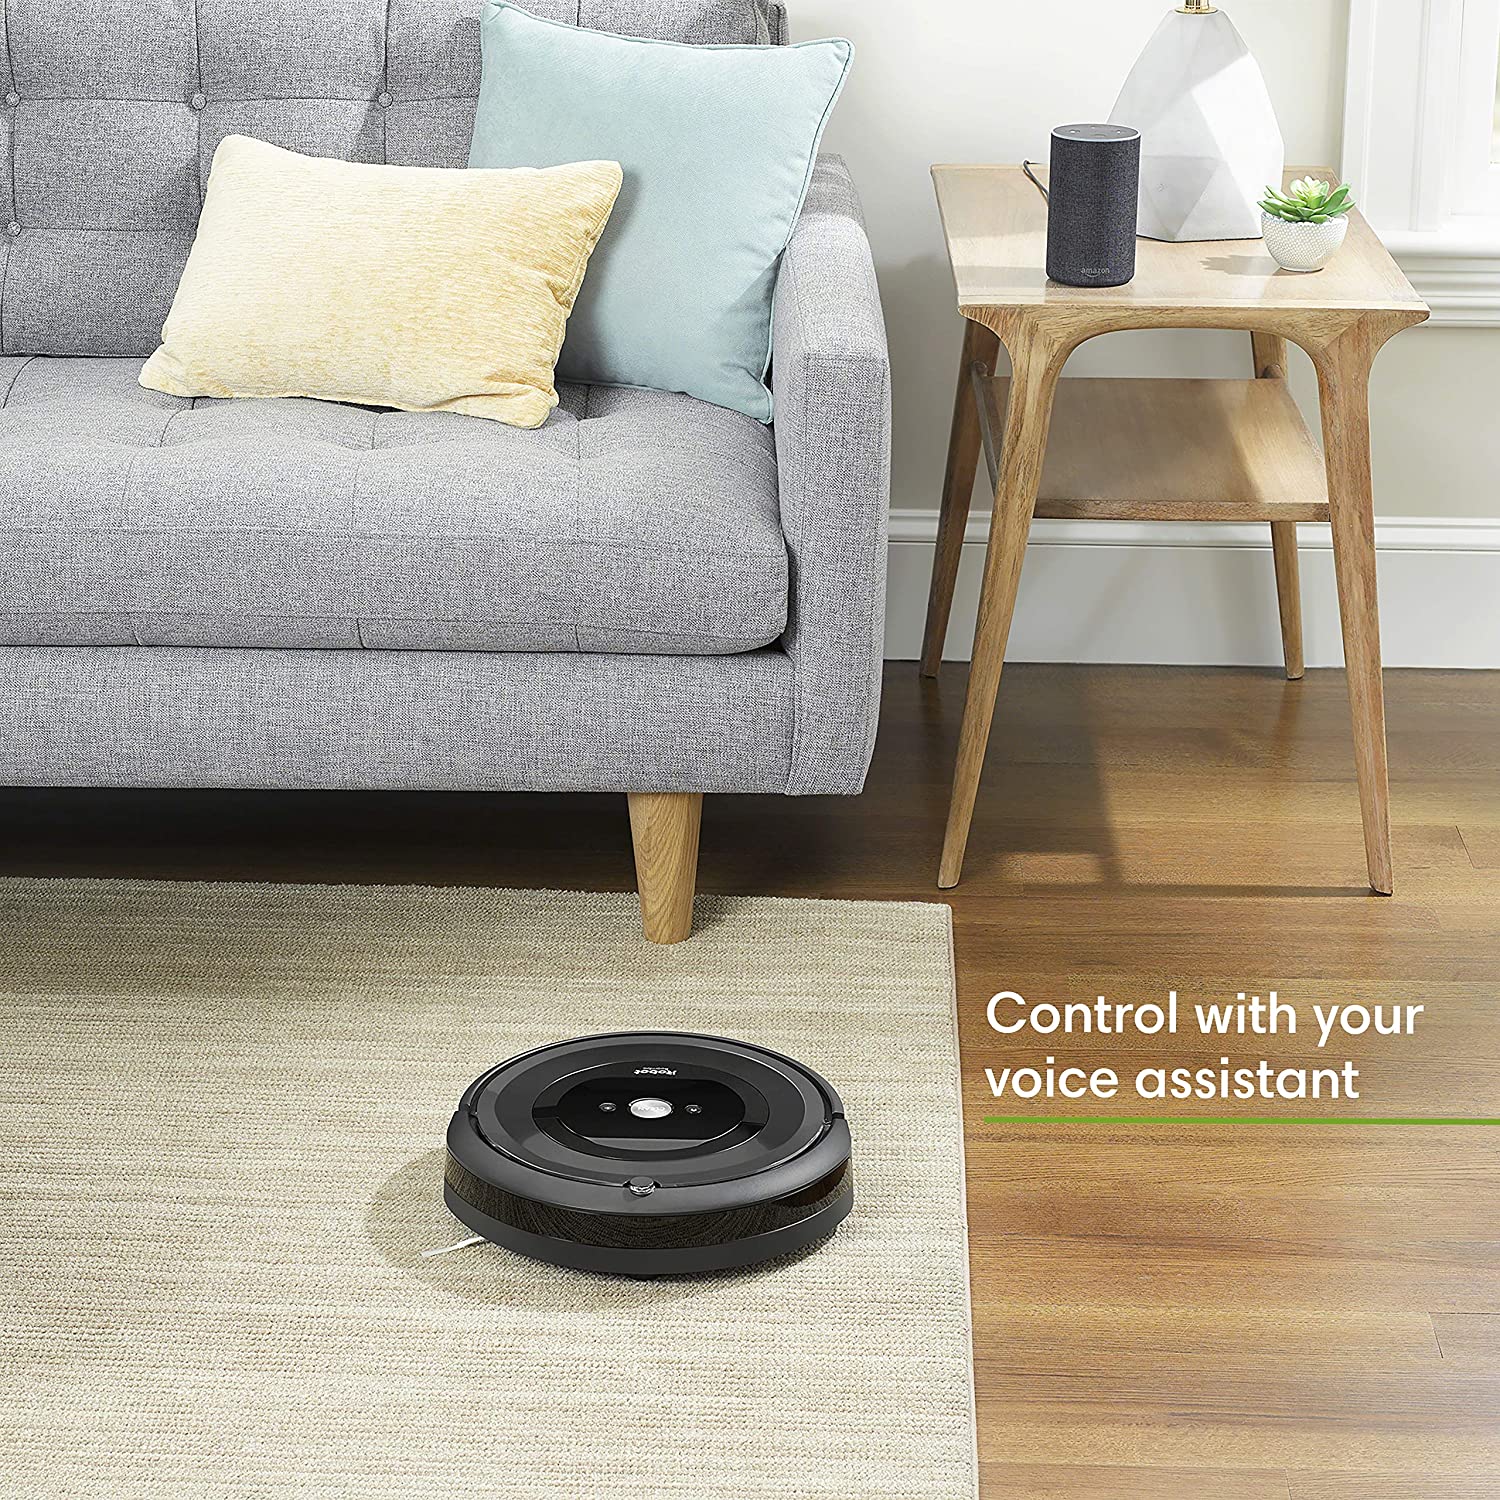 iRobot Roomba E5 (5150) Robot Vacuum - Wi-Fi Connected, Works with Alexa, Ideal for Pet Hair, Carpets, Hard, Self-Charging Robotic Vacuum, Black - image 2 of 3